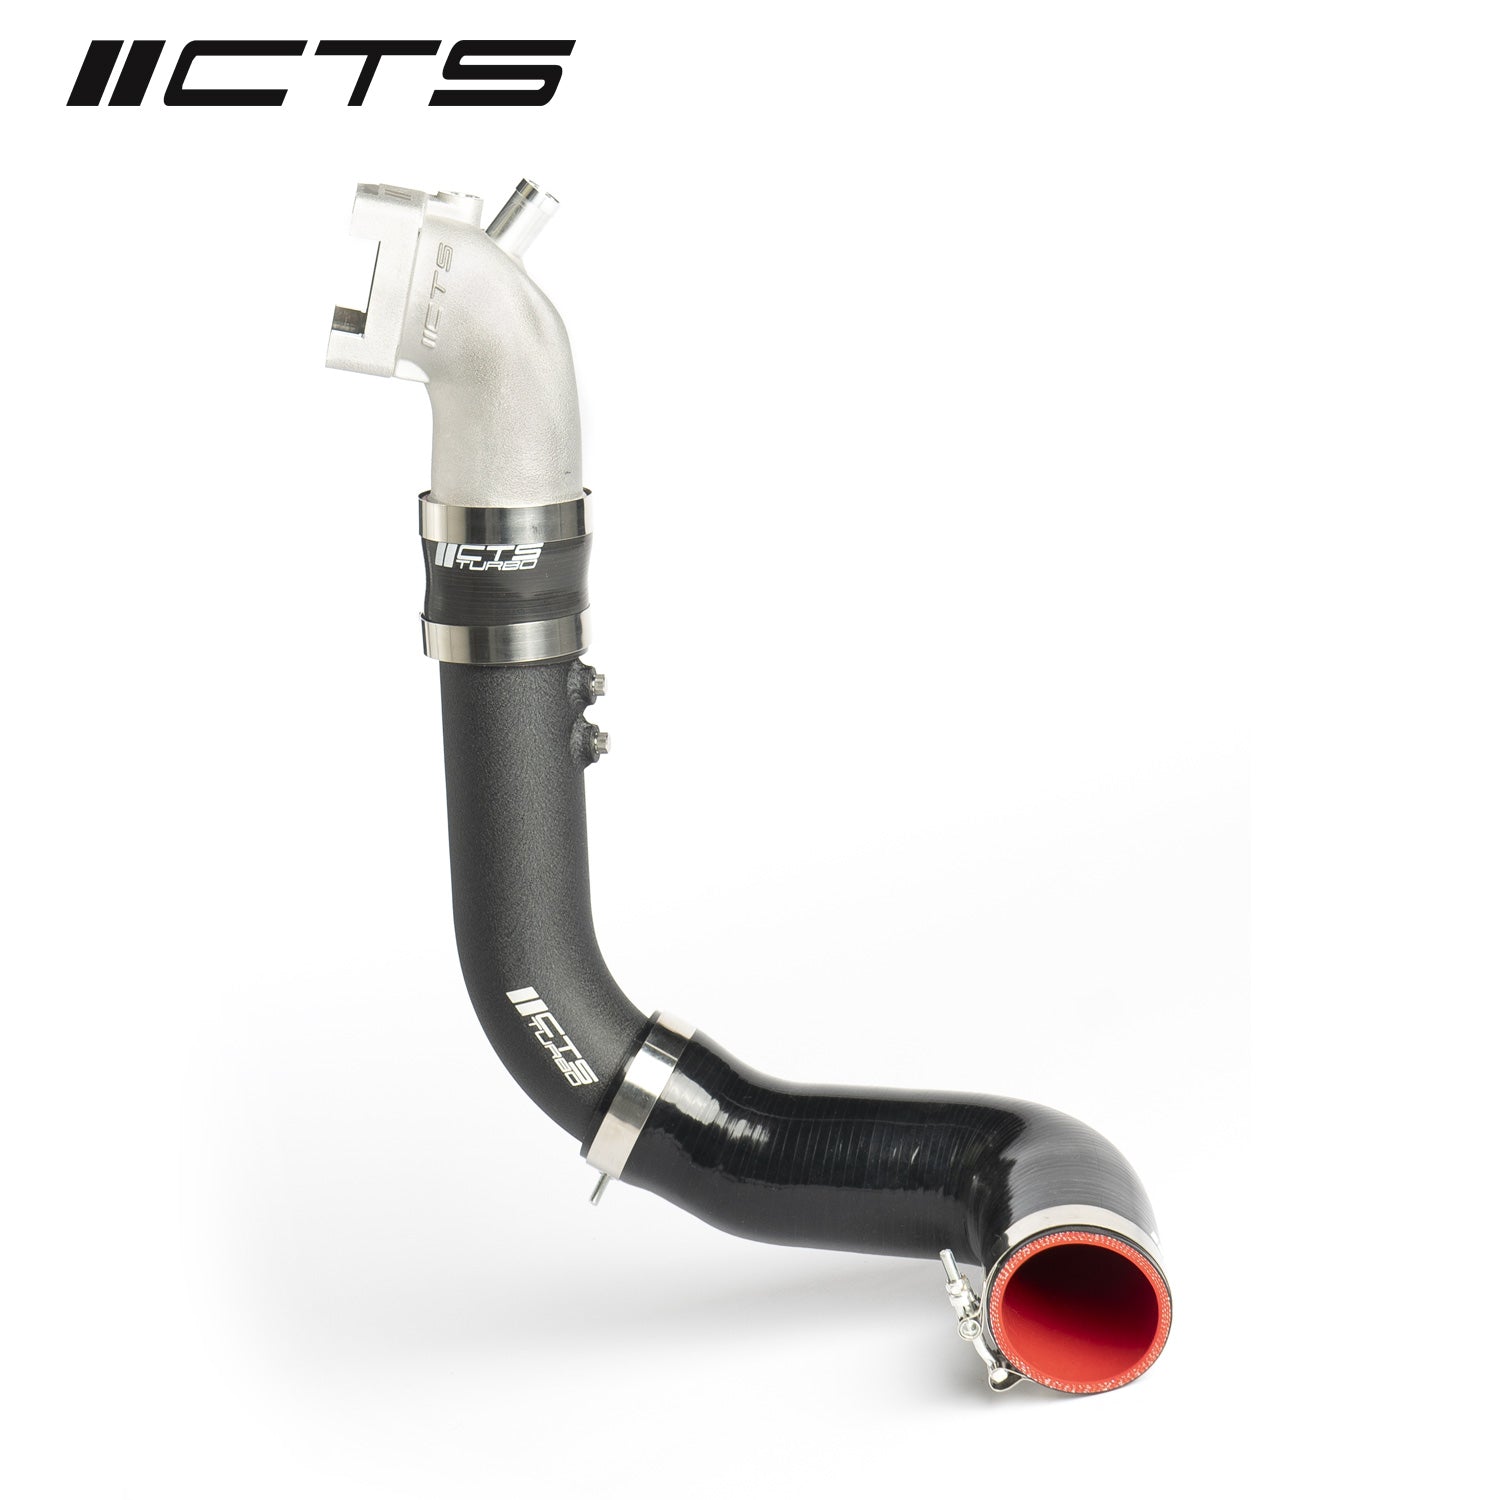 CTS TURBO THROTTLE BODY INLET KIT FOR 8V.2/8Y/8S AUDI RS3/TT-RS - 0